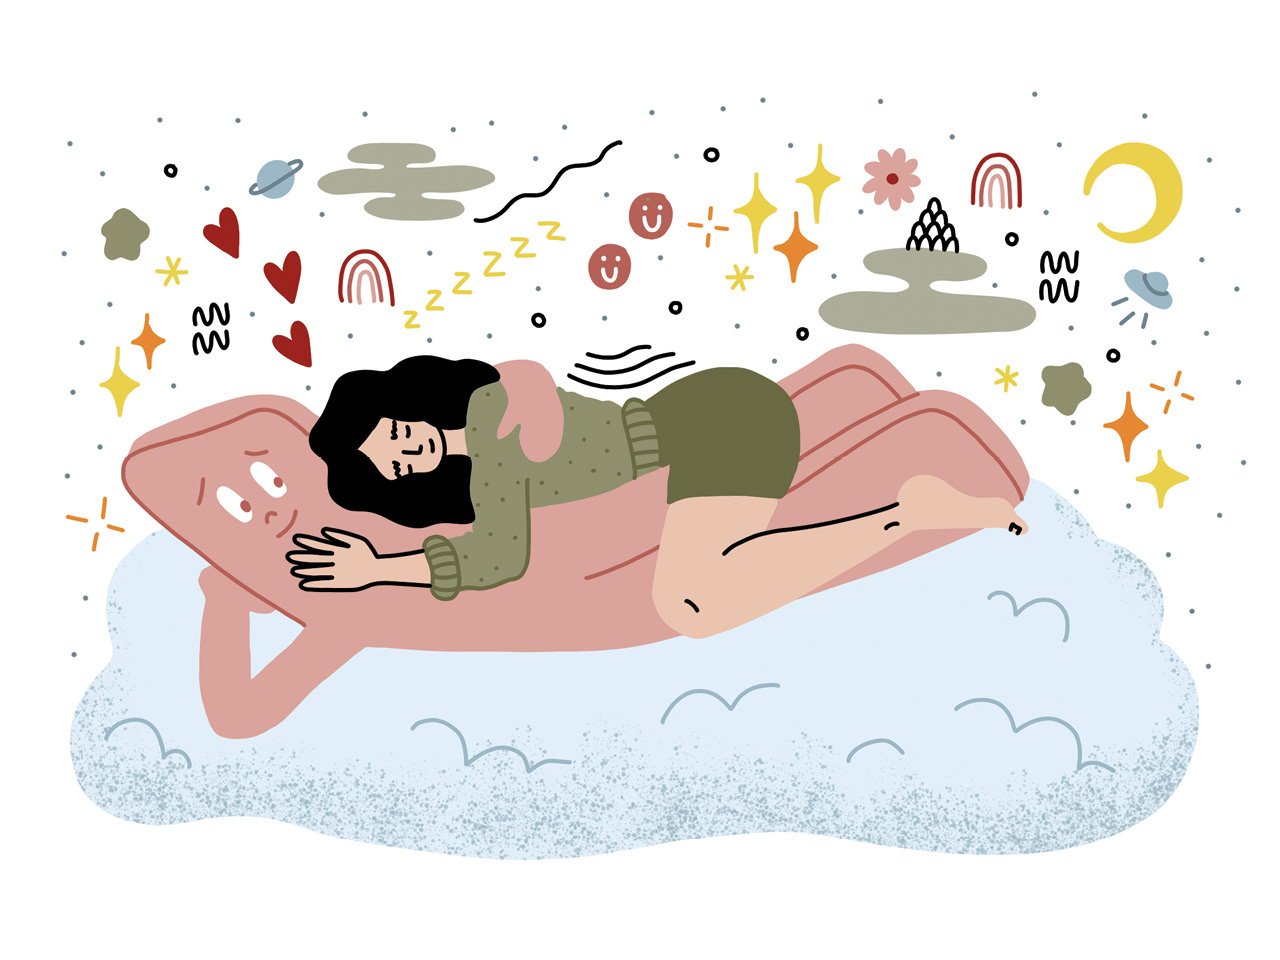 An illustration of a woman sleeping on a man-shaped body pillow